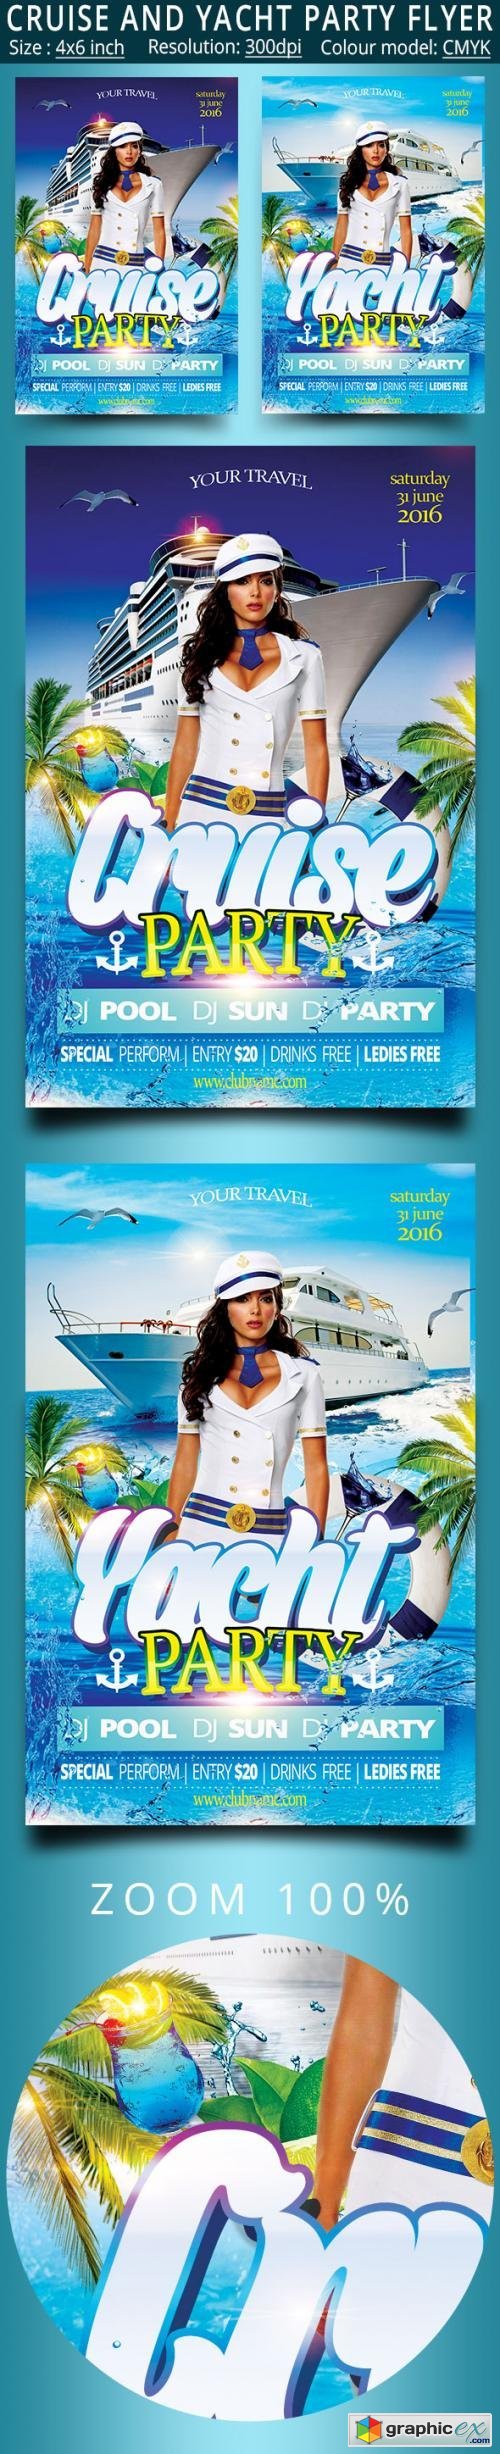 Cruise And Yacht Party Flyer